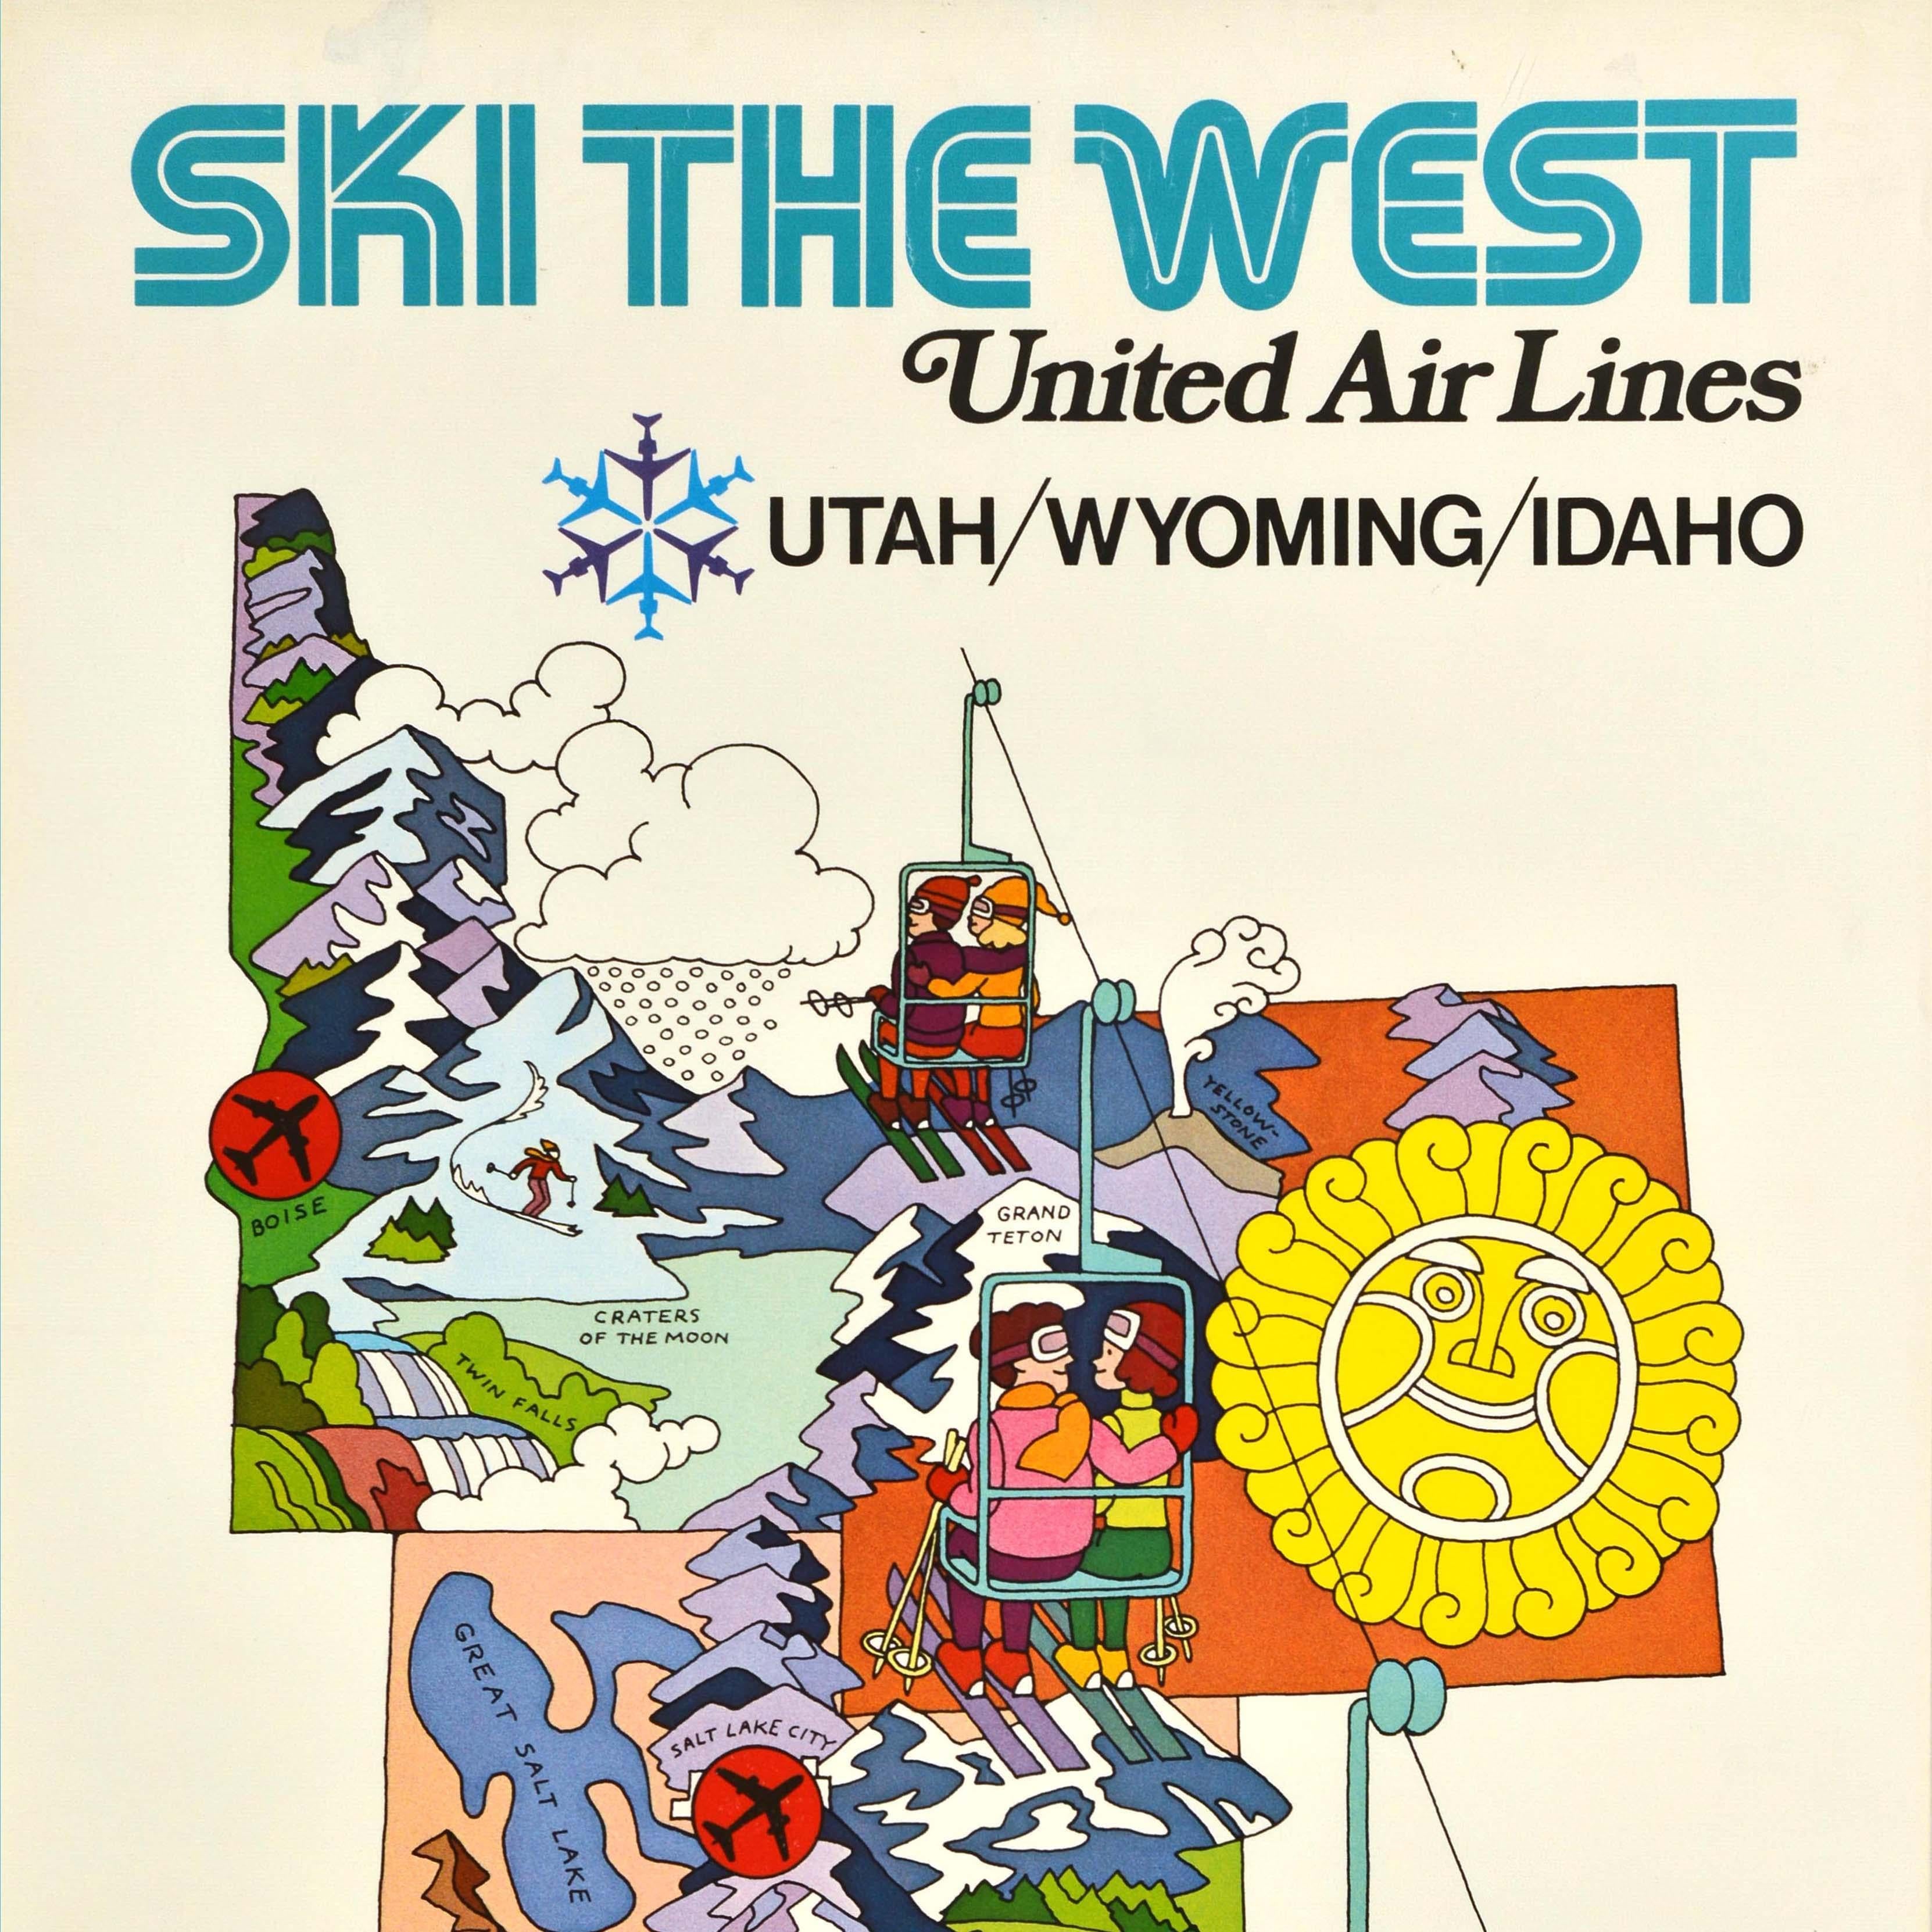 Original vintage winter sport travel poster - Ski The West by United Air Lines Utah Wyoming Idaho Your land is our land - featuring a fun illustration depicting couples on a ski lift going up a mountain with colourful psychedelic style images of